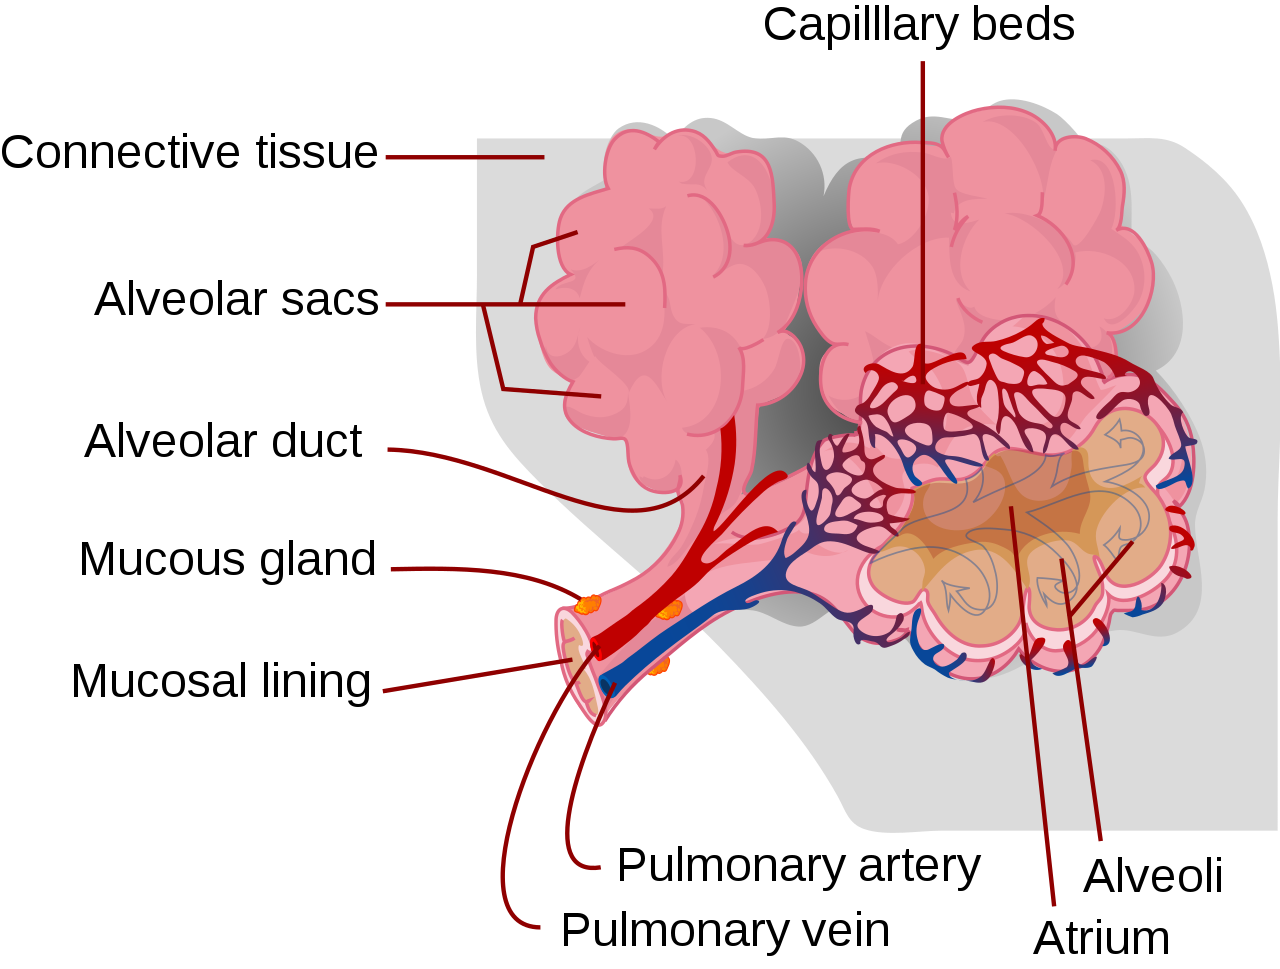 Diagram depicting the alveoli in the lungs.